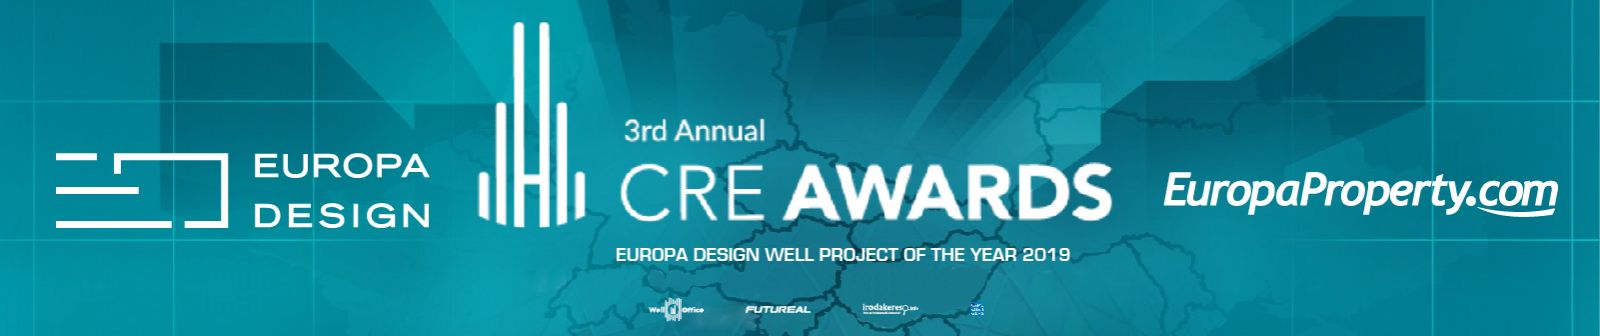 EUROPA PROPERTY WELL - PROJECT OF THE YEAR 2019 BY EUROPA DESIGN